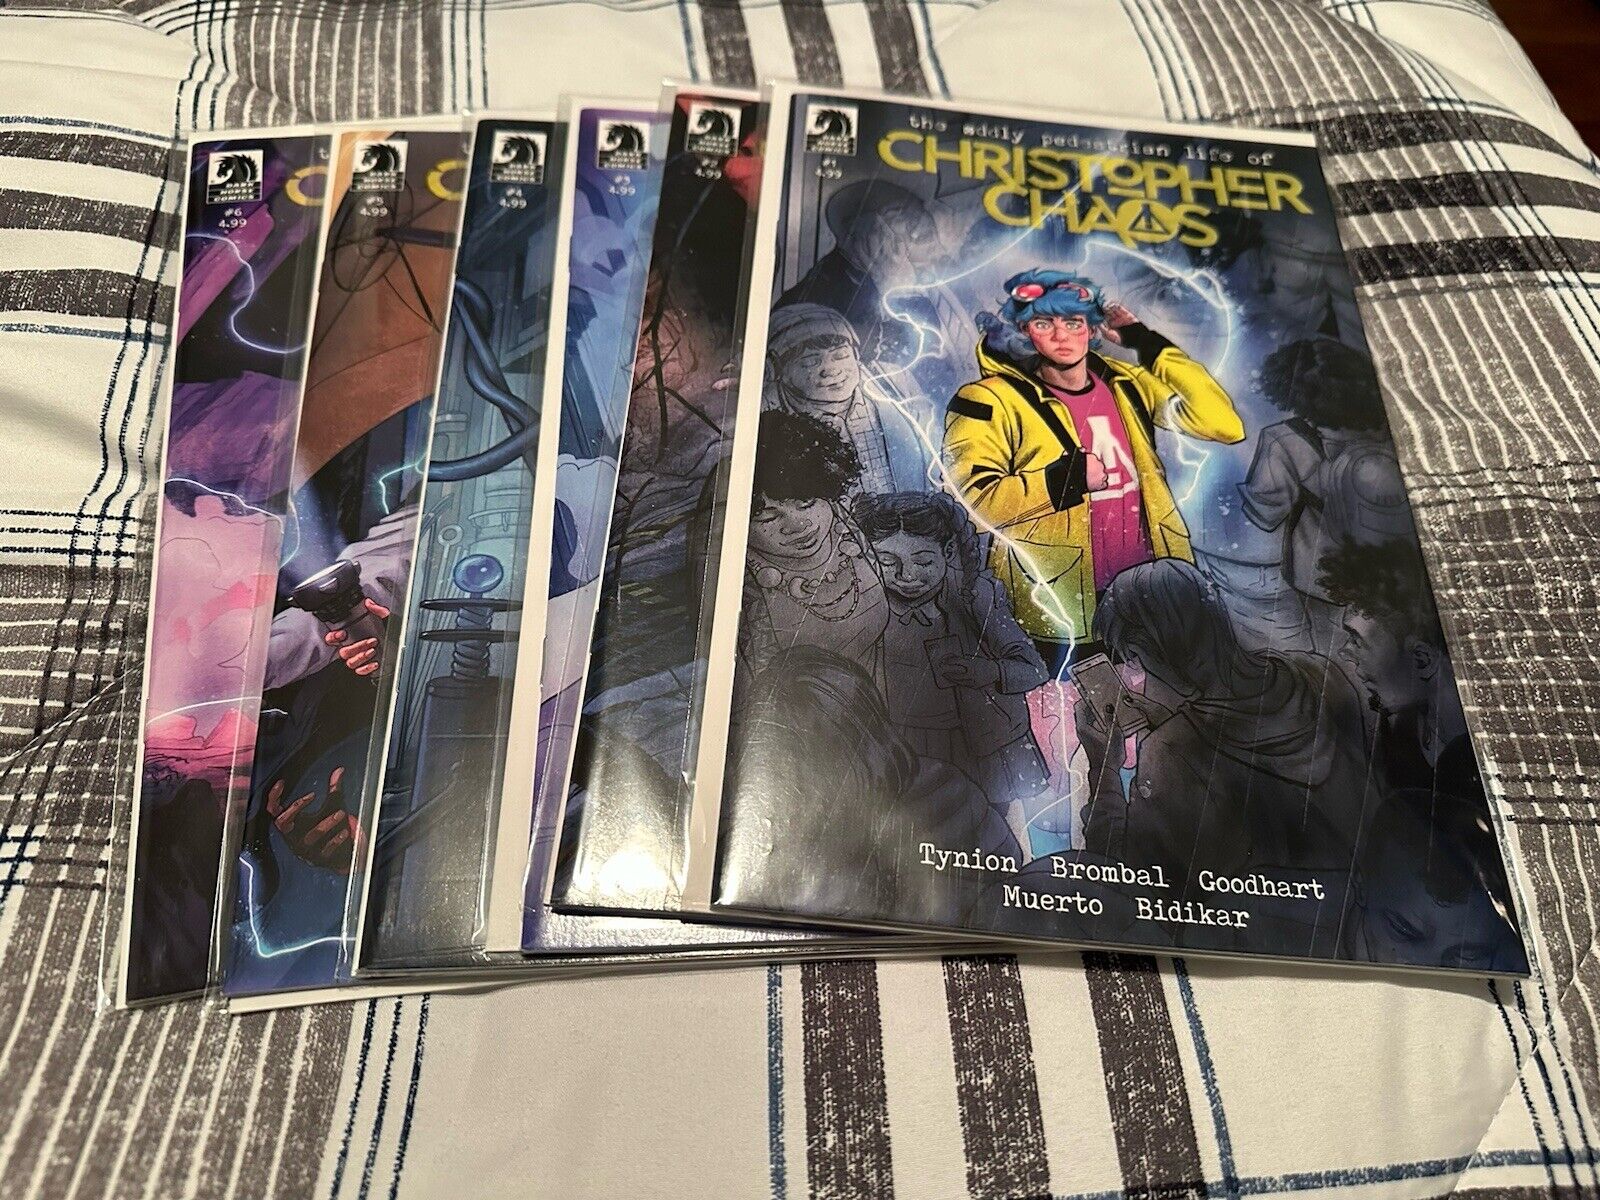 The Oddly Pedestrian Life Of Christopher Chaos #1-6 Vol. 1 Dark Horse 2023